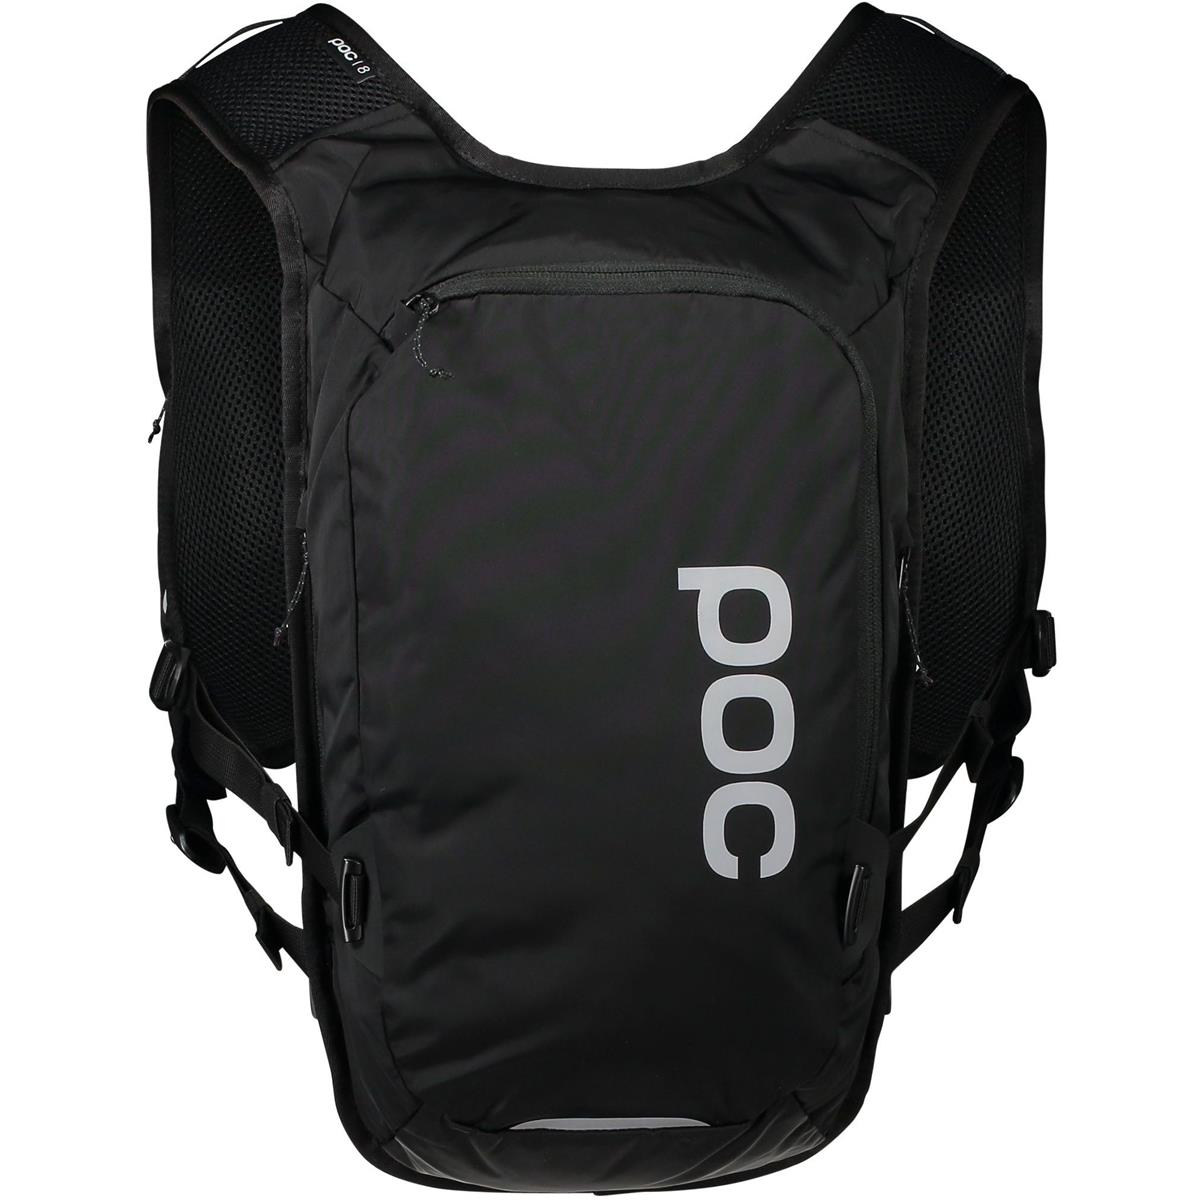 POC Protector Backpack with Hydration System Compartment Column VPD Uranium Black - 8L